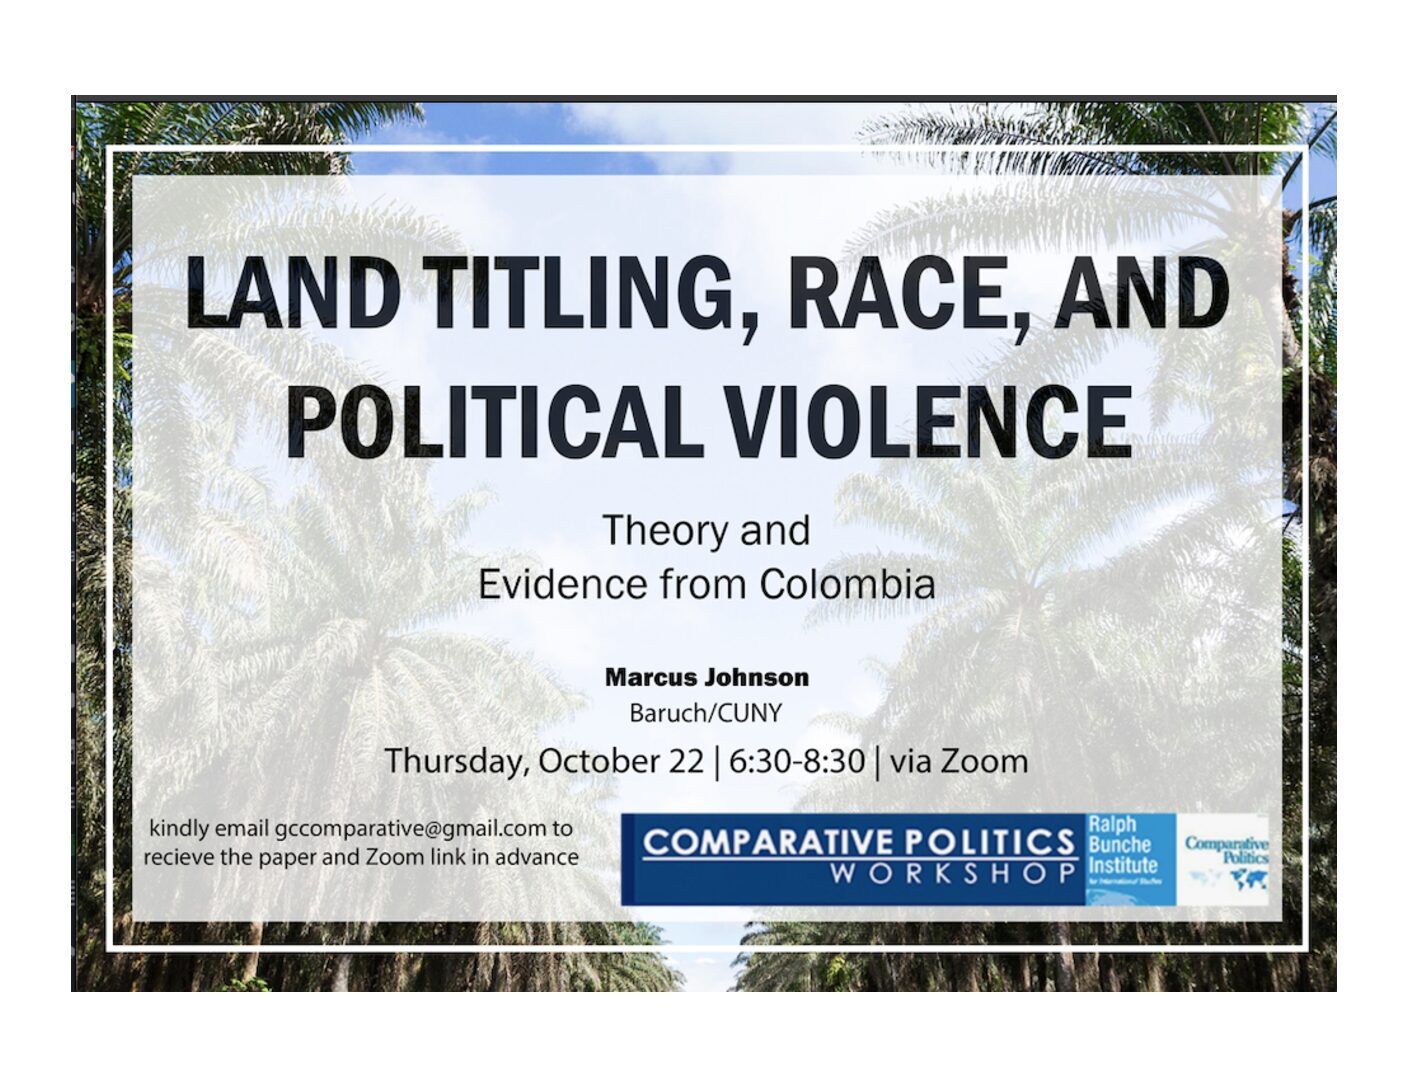 CPW: Marcus Johnson, “Land Titling, Race, and Political Violence: Theory and Evidence from Colombia," Thursday, October 22, 6:30PM